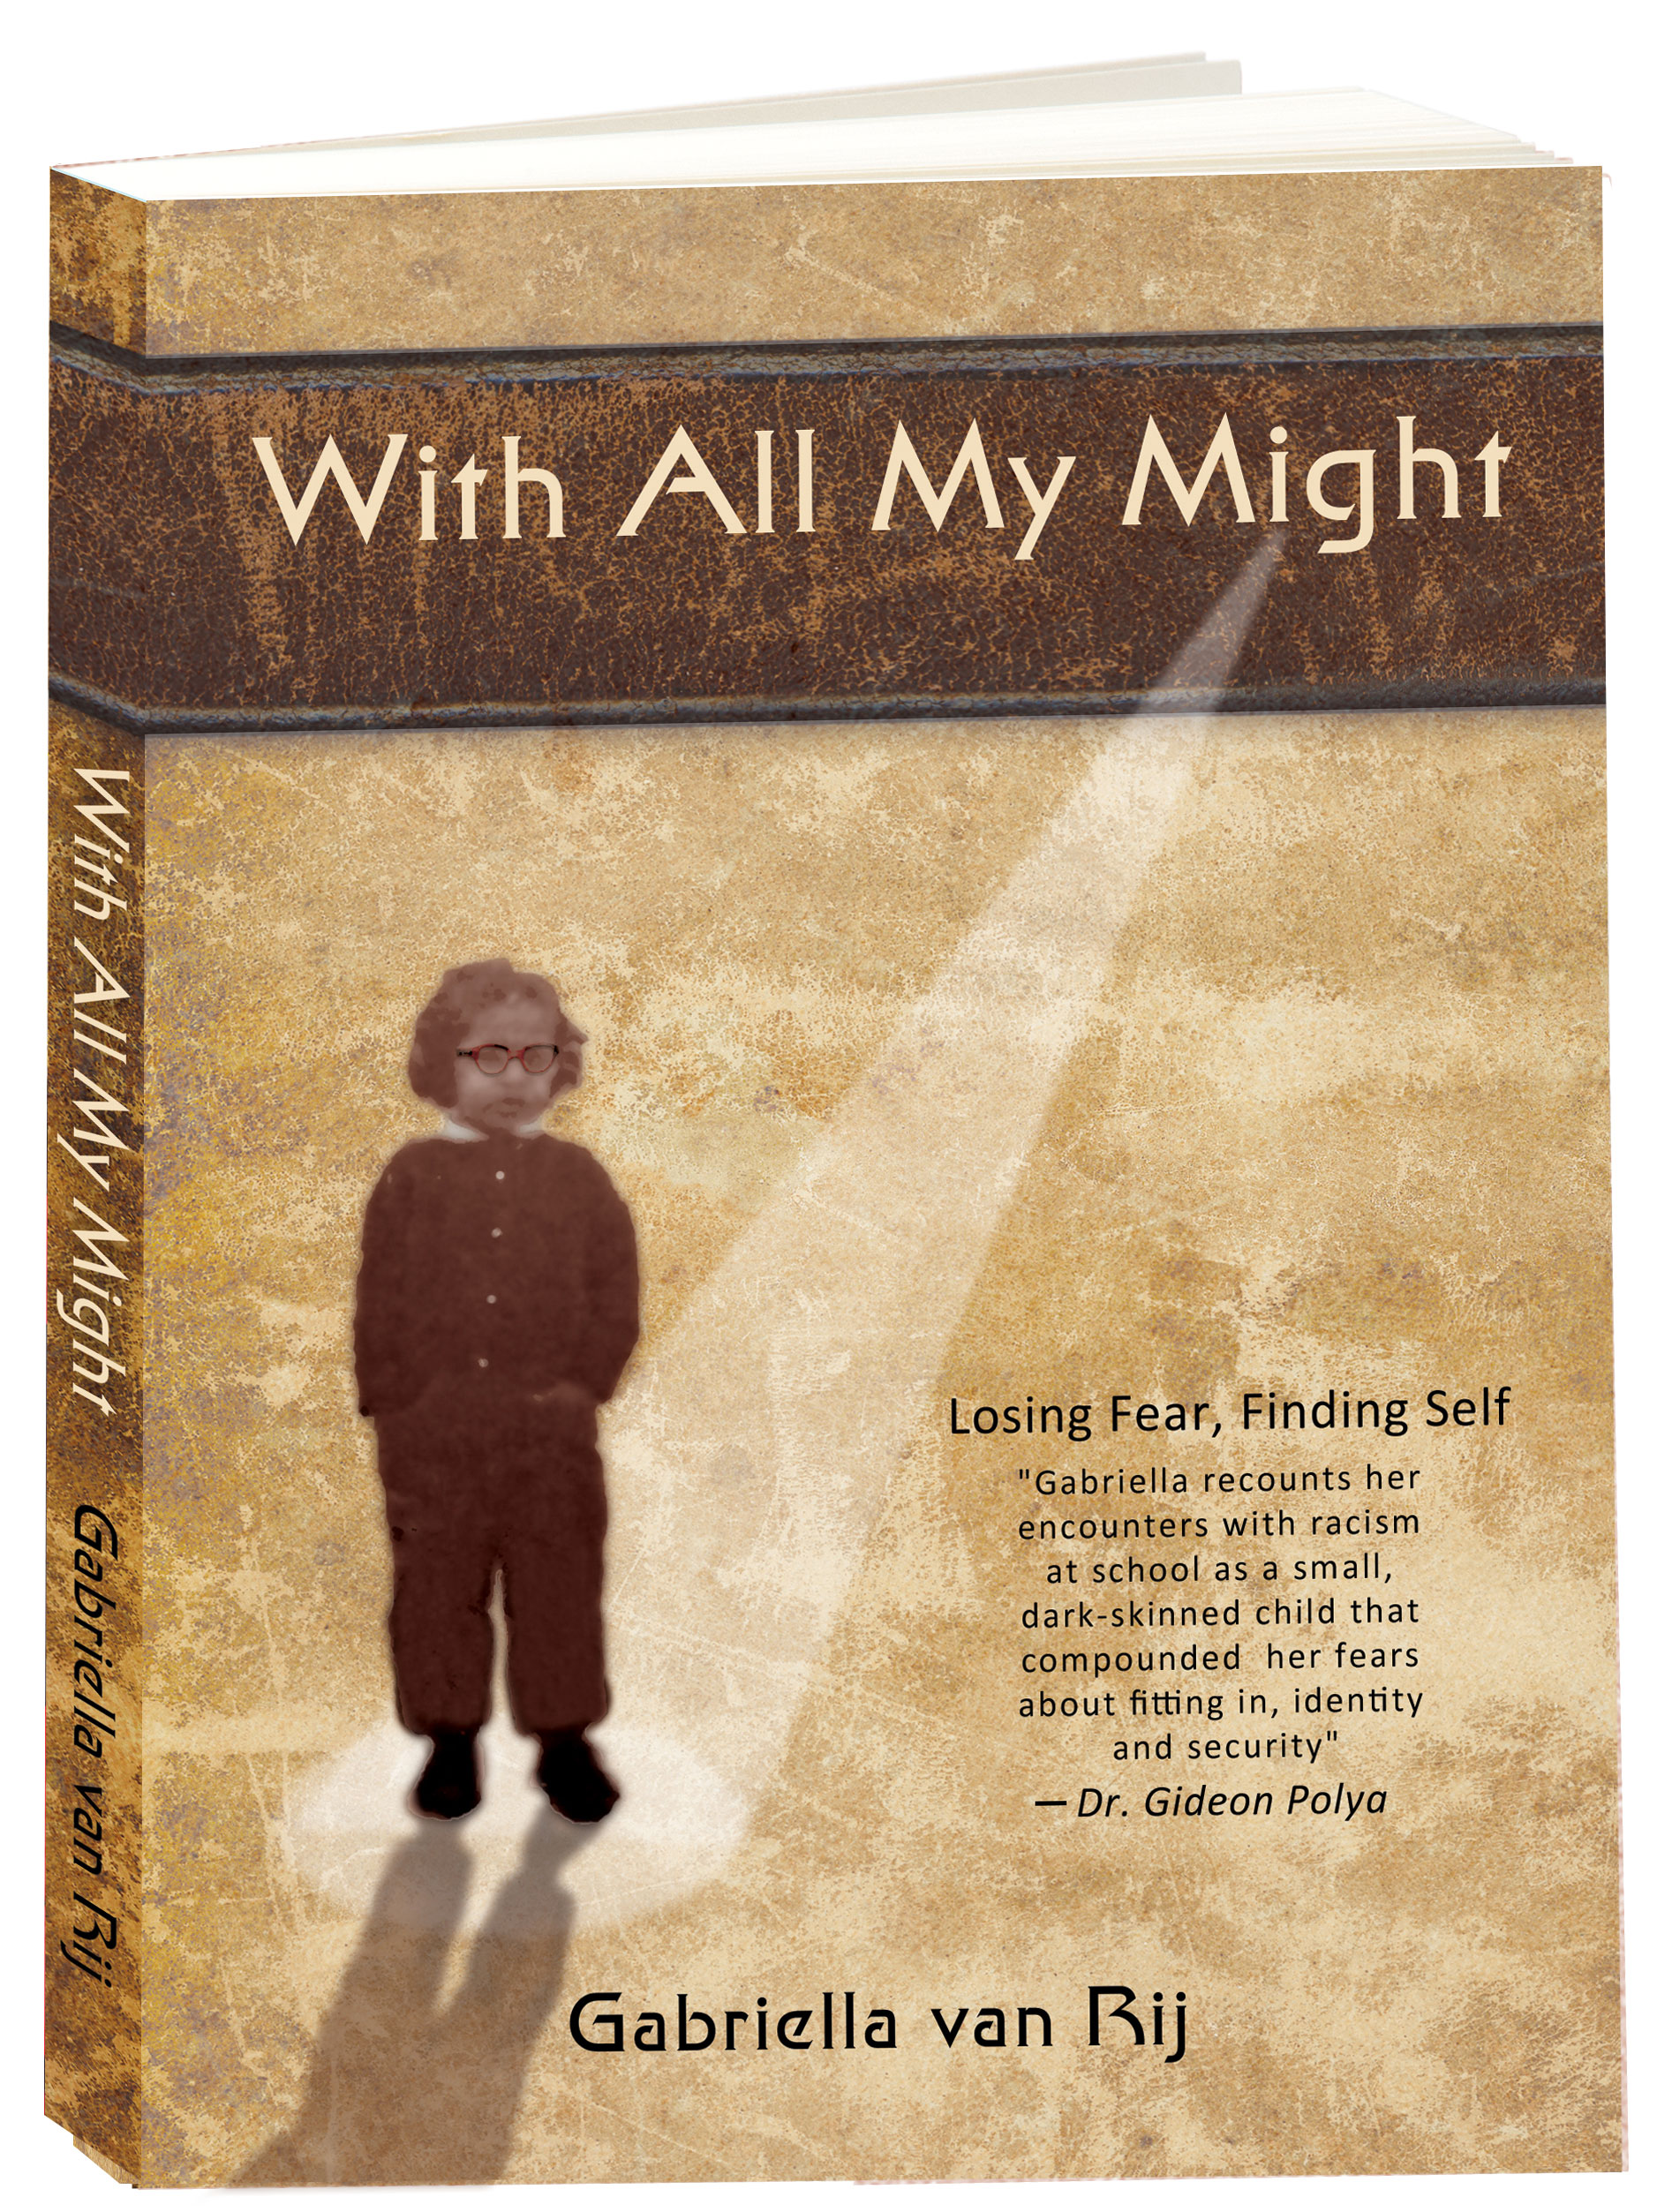 With All My Might, by Gabriella van Rij. A memoir of her unique story.